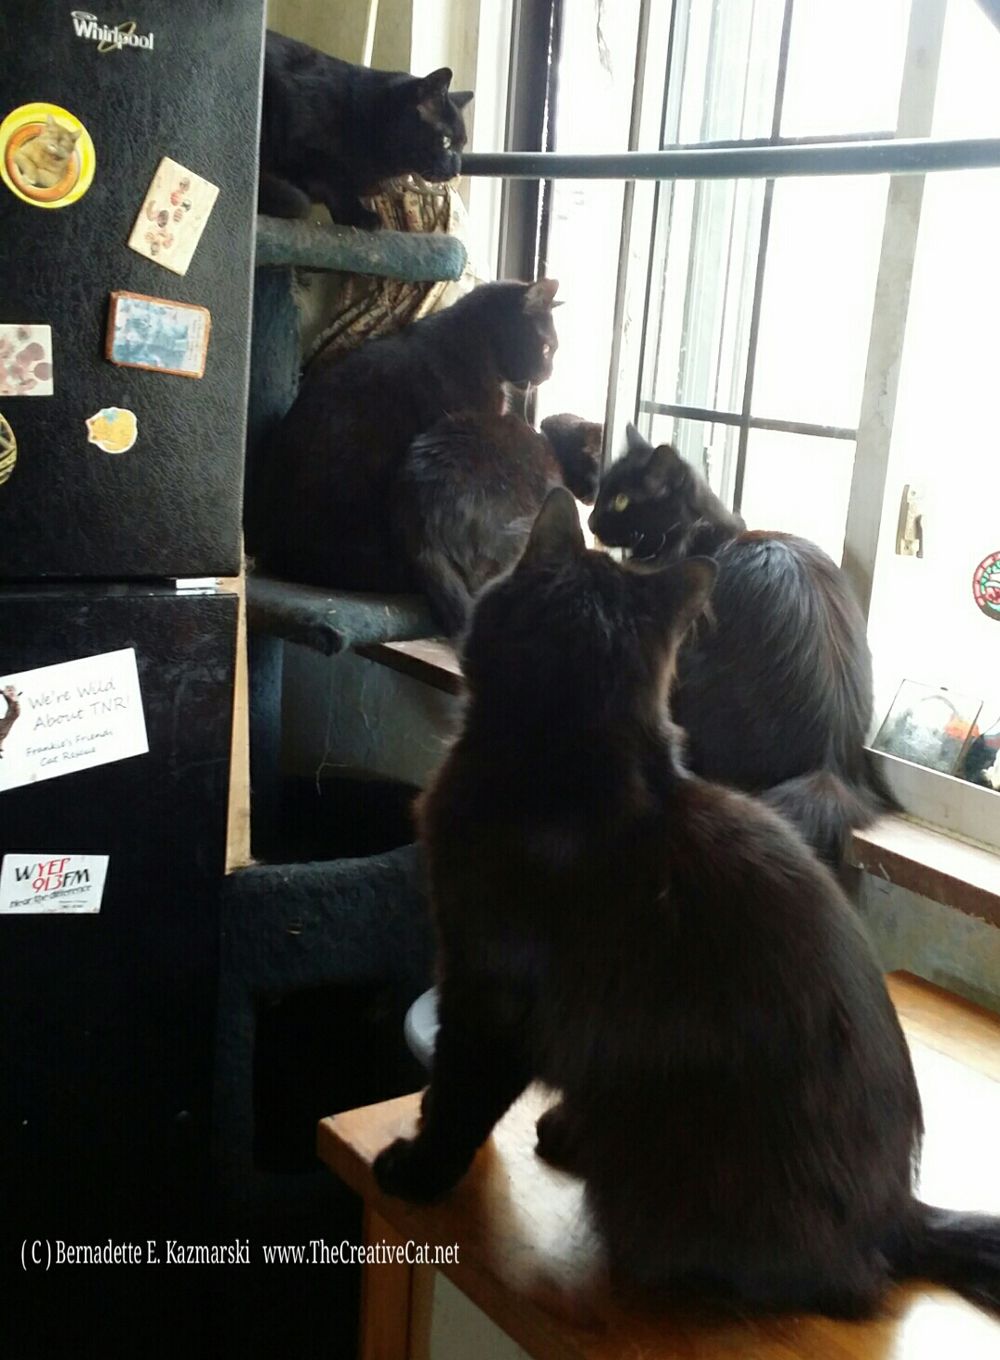 OPEN WINDOW! Bella, Jelly Bean, Mimi, Hamlet, Basil. Of course there's a screen. 